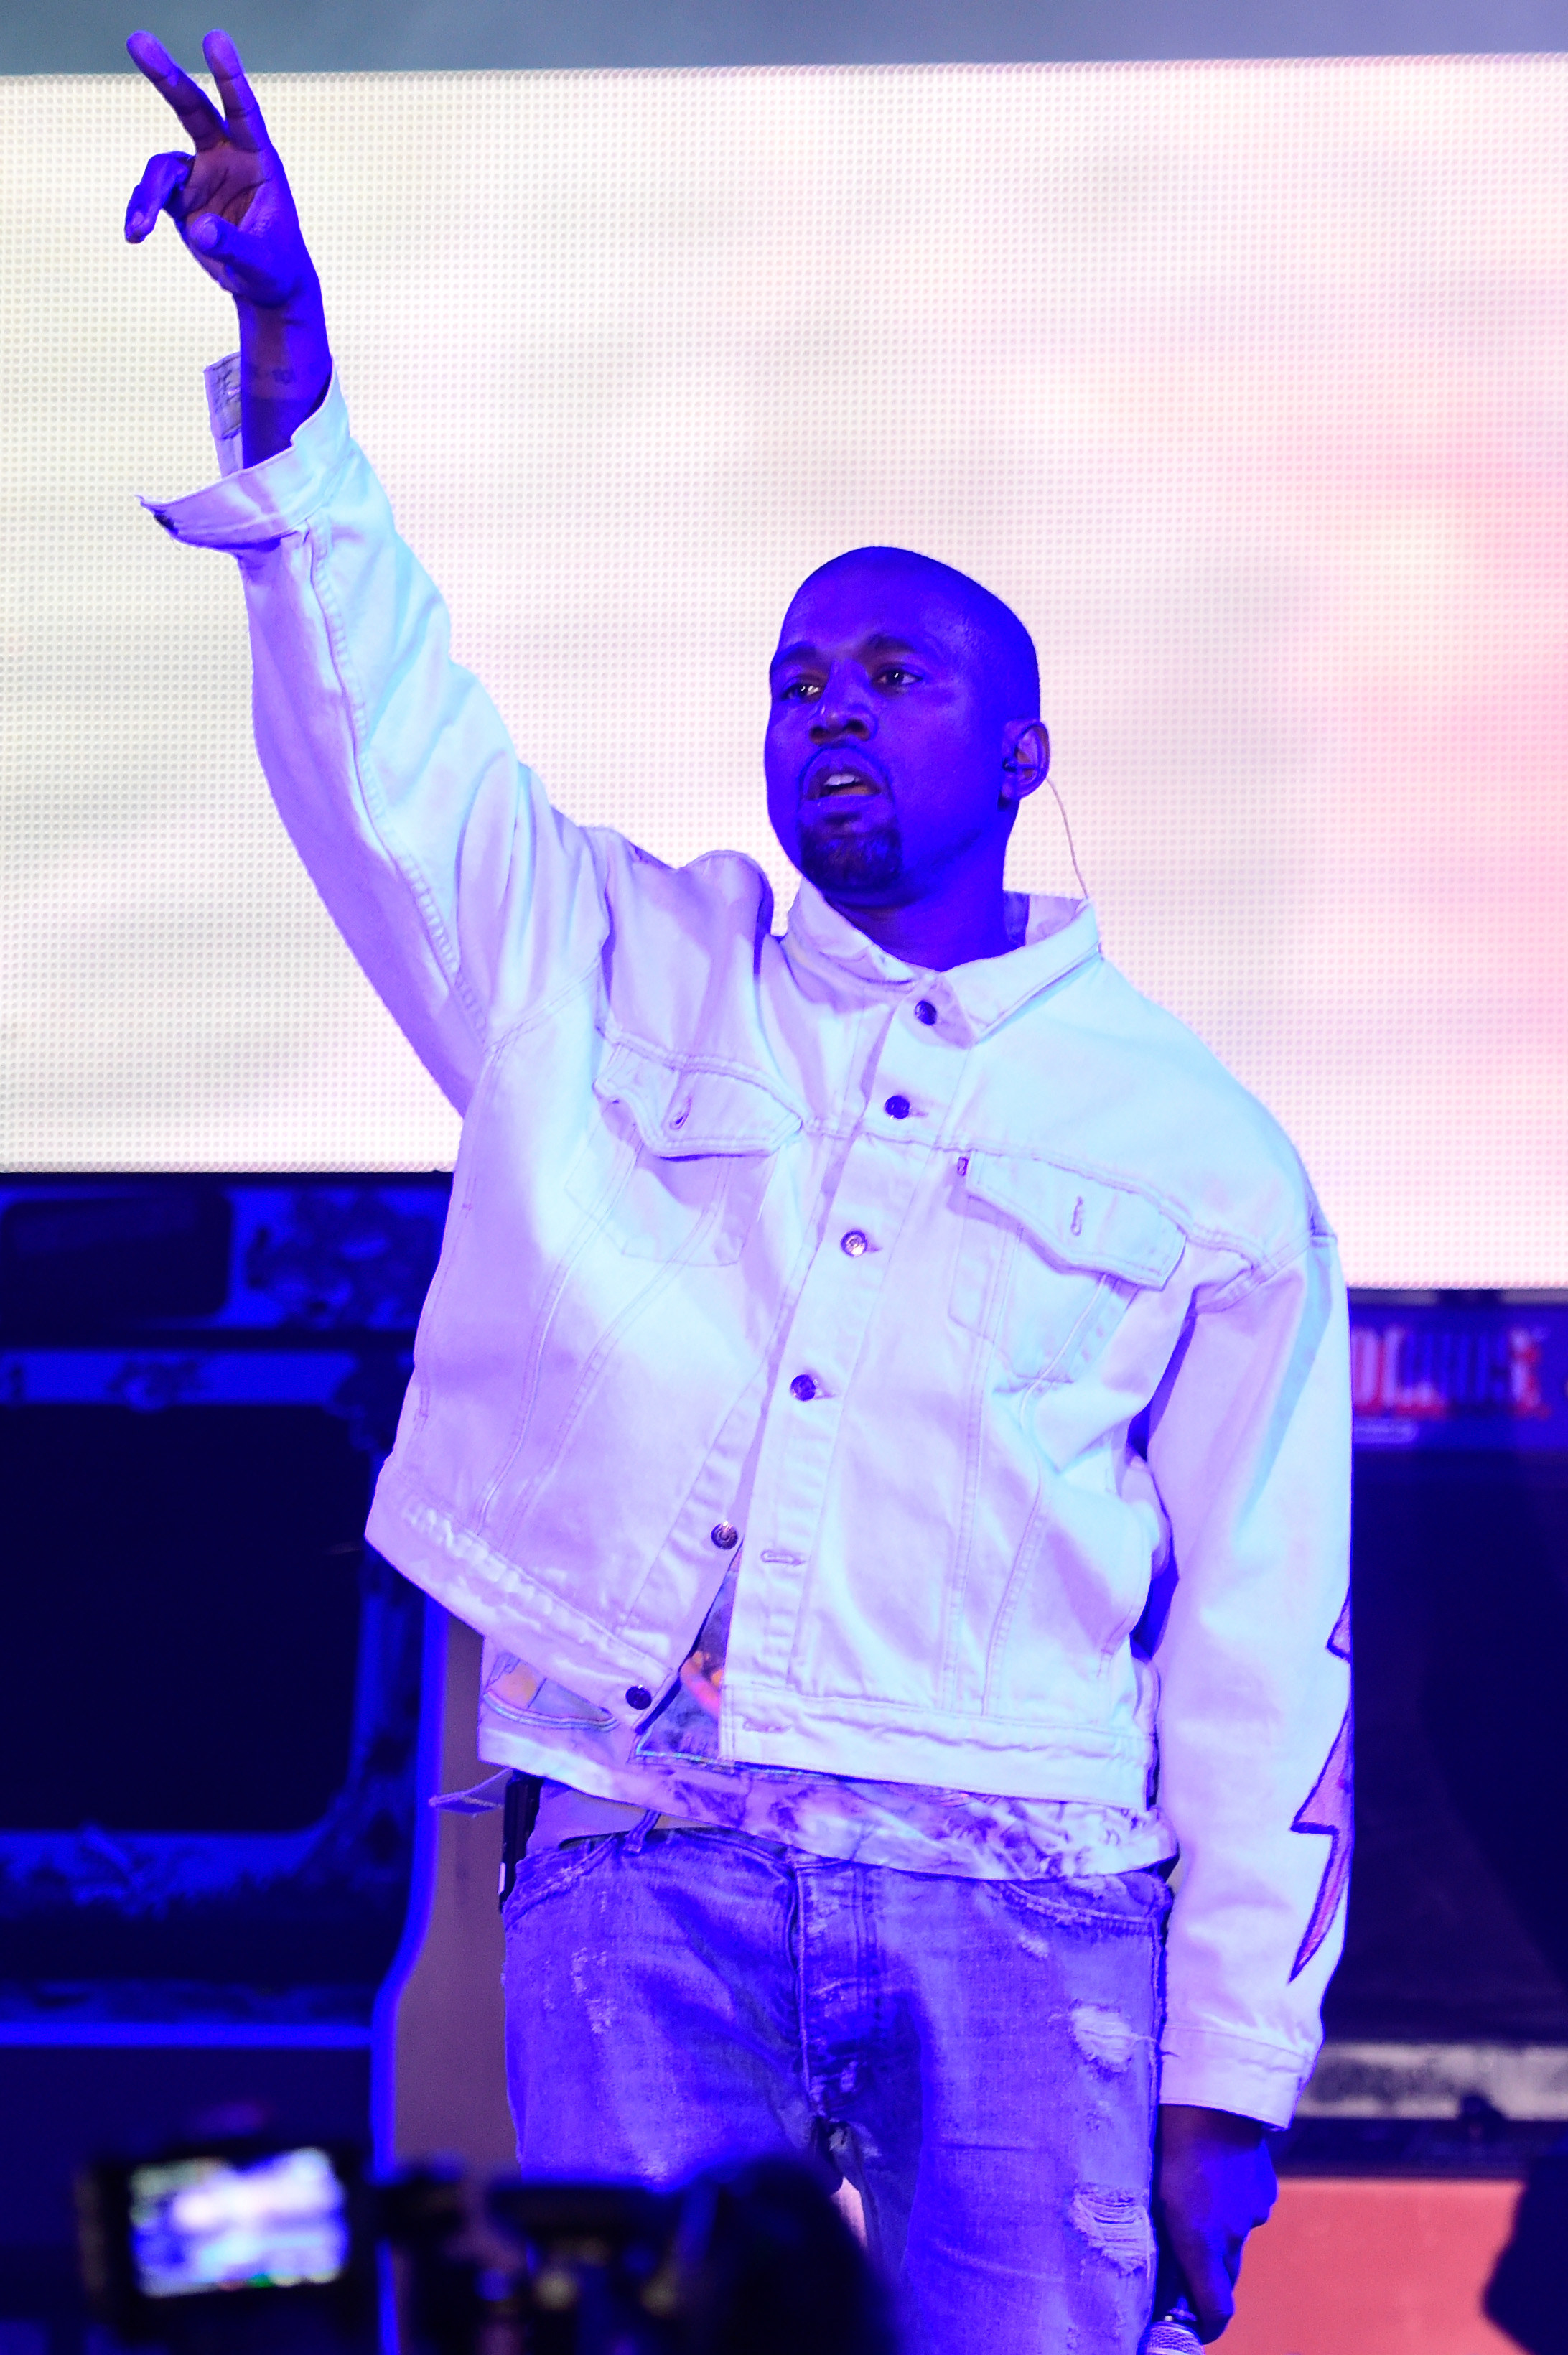 Kanye West performs onstage during day 1 of the 2016 Coachella Valley Music &amp; Arts Festival Weekend 1 at the Empire Polo Club on April 15, 2016